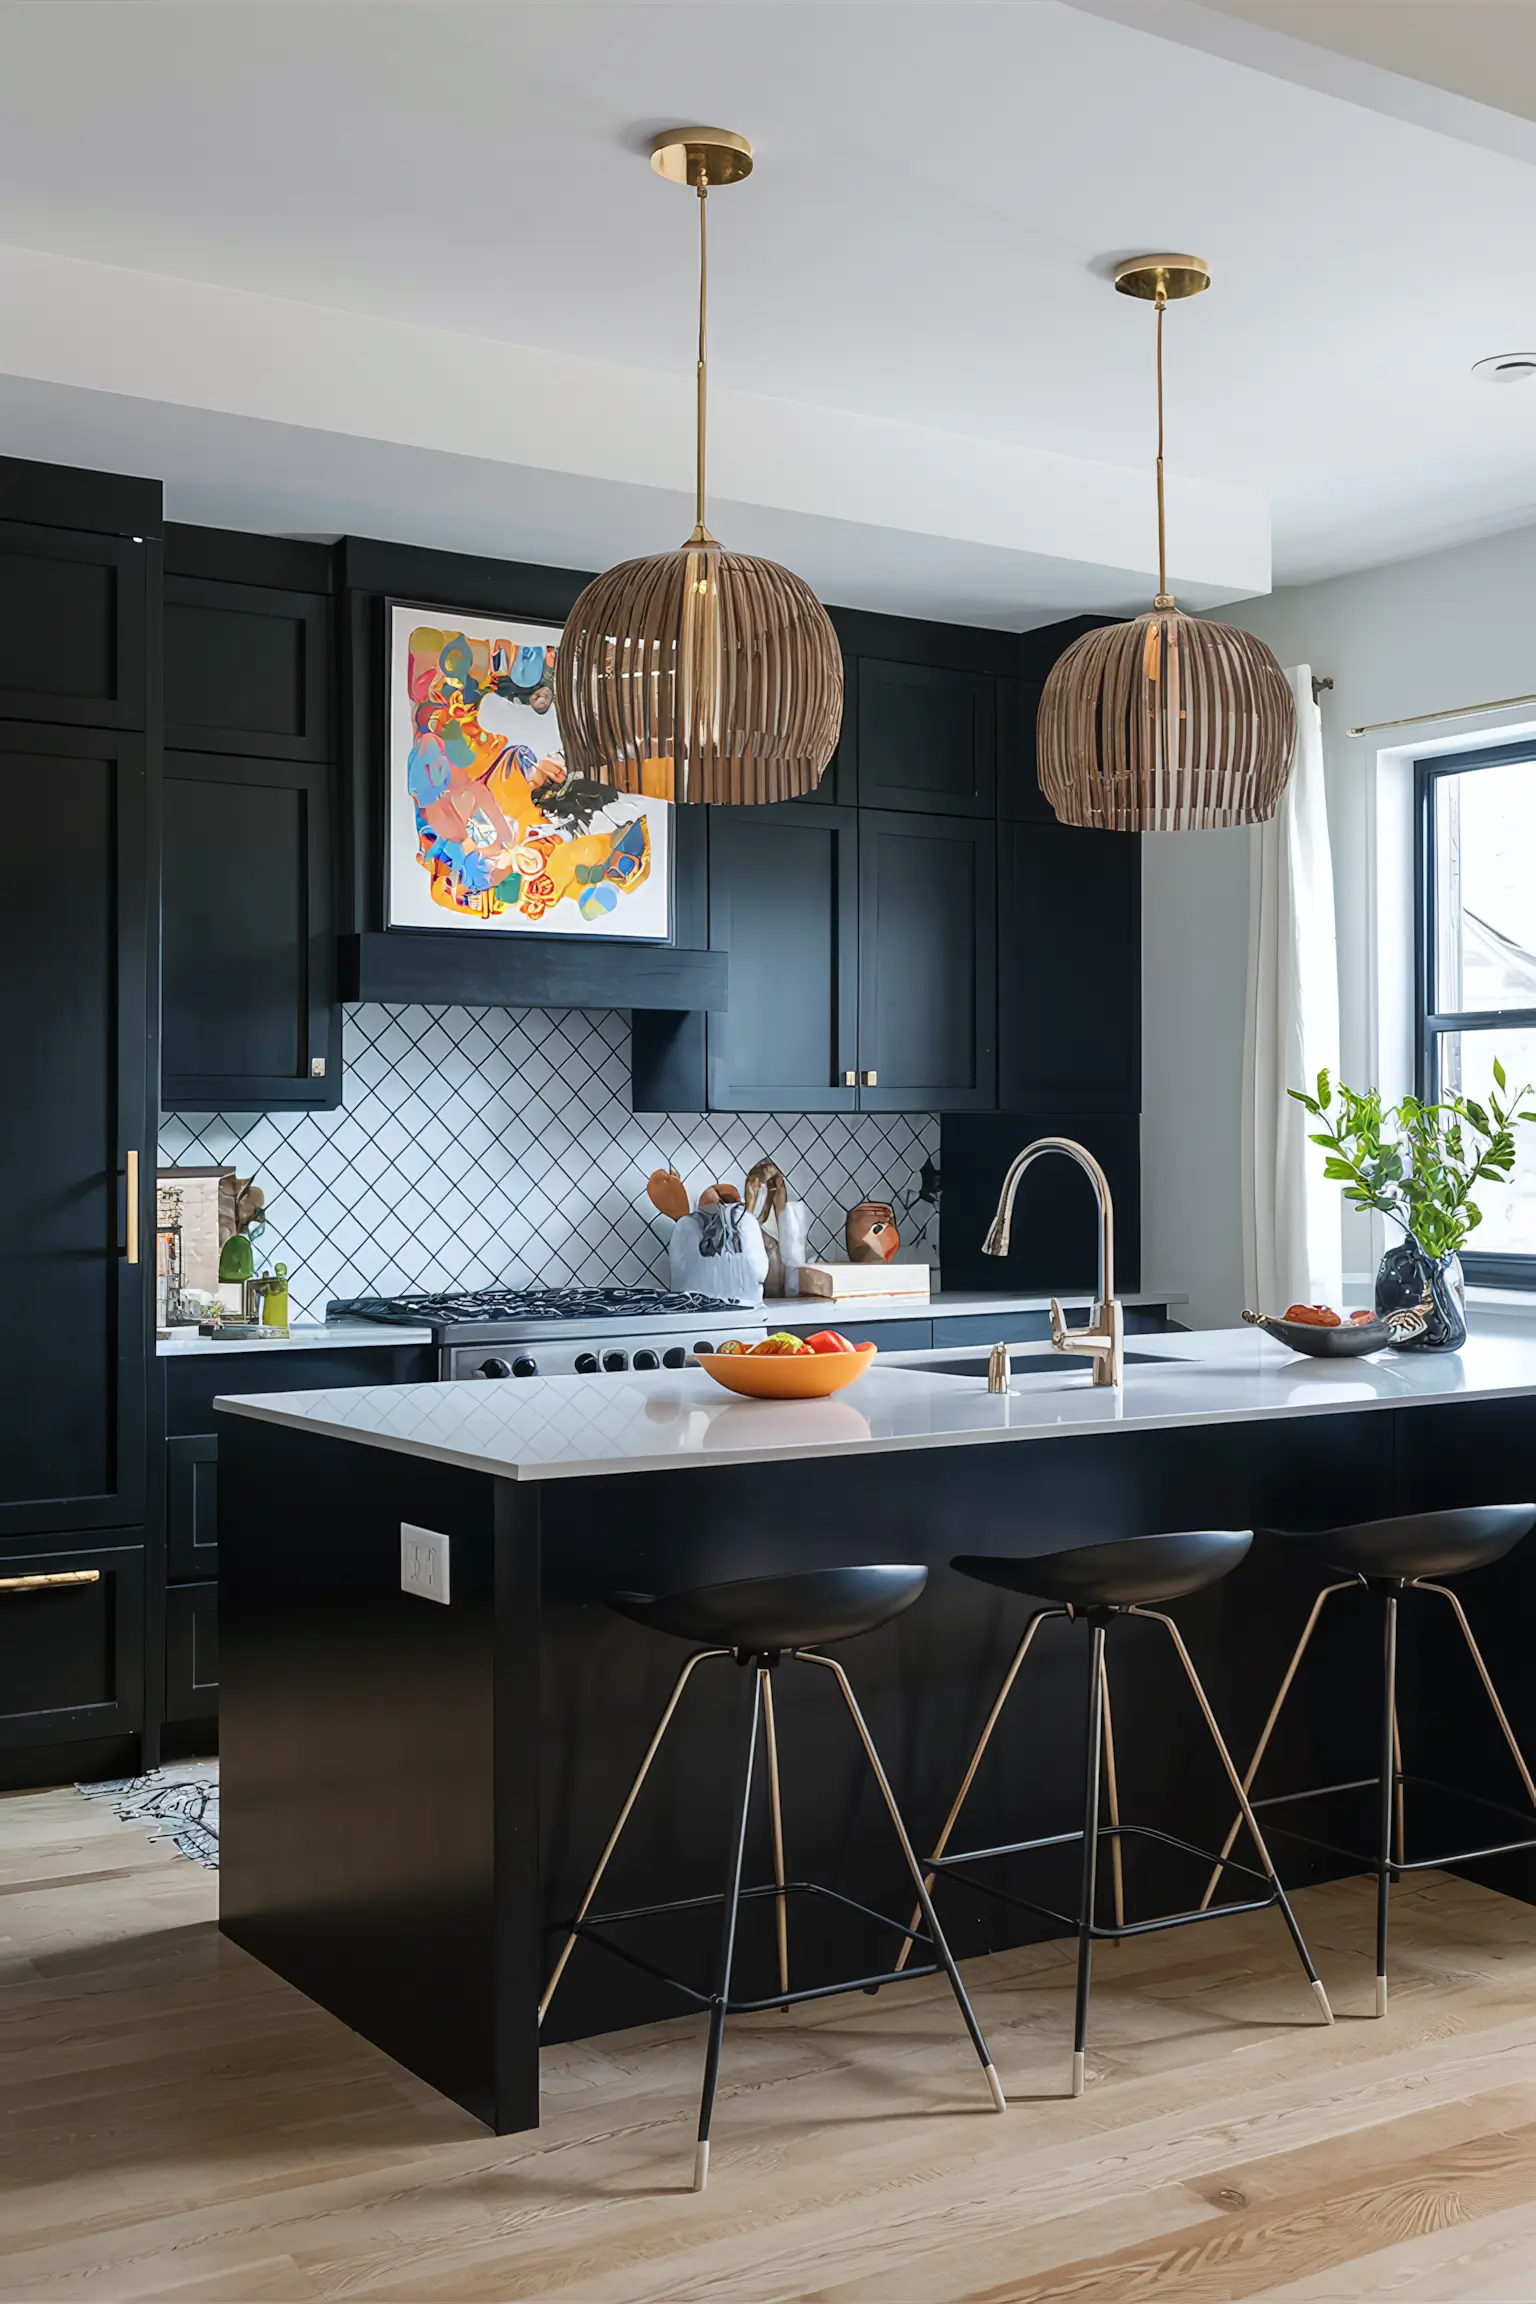 Black kitchen with bold artwork, chic accessories, and stylish lighting fixtures.